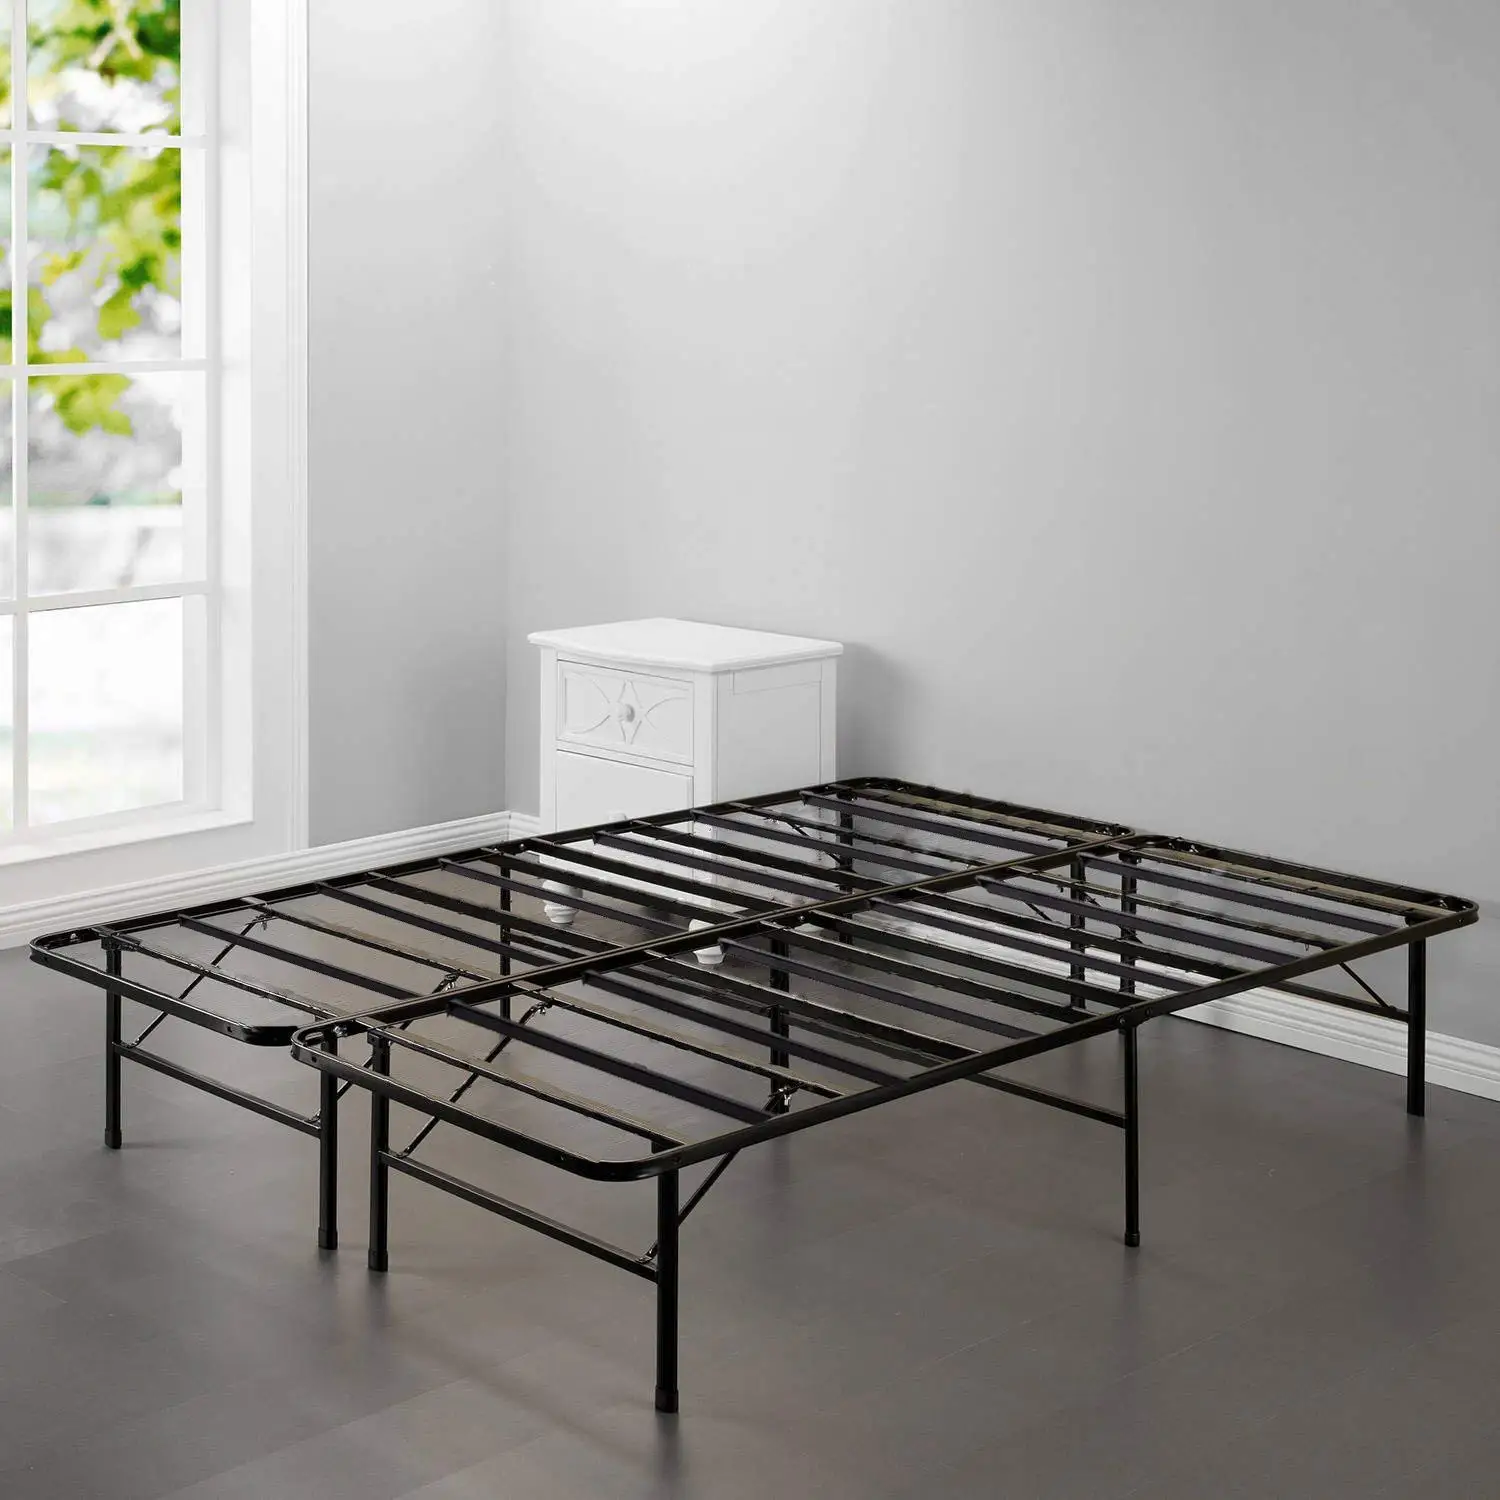 Amazon Com Milliard 6 Legged Super Heavy Duty Queen Size Metal Bed Frame With Double King Metal Bed Frame King Size Metal Bed Frame Queen Size Metal Bed Frame